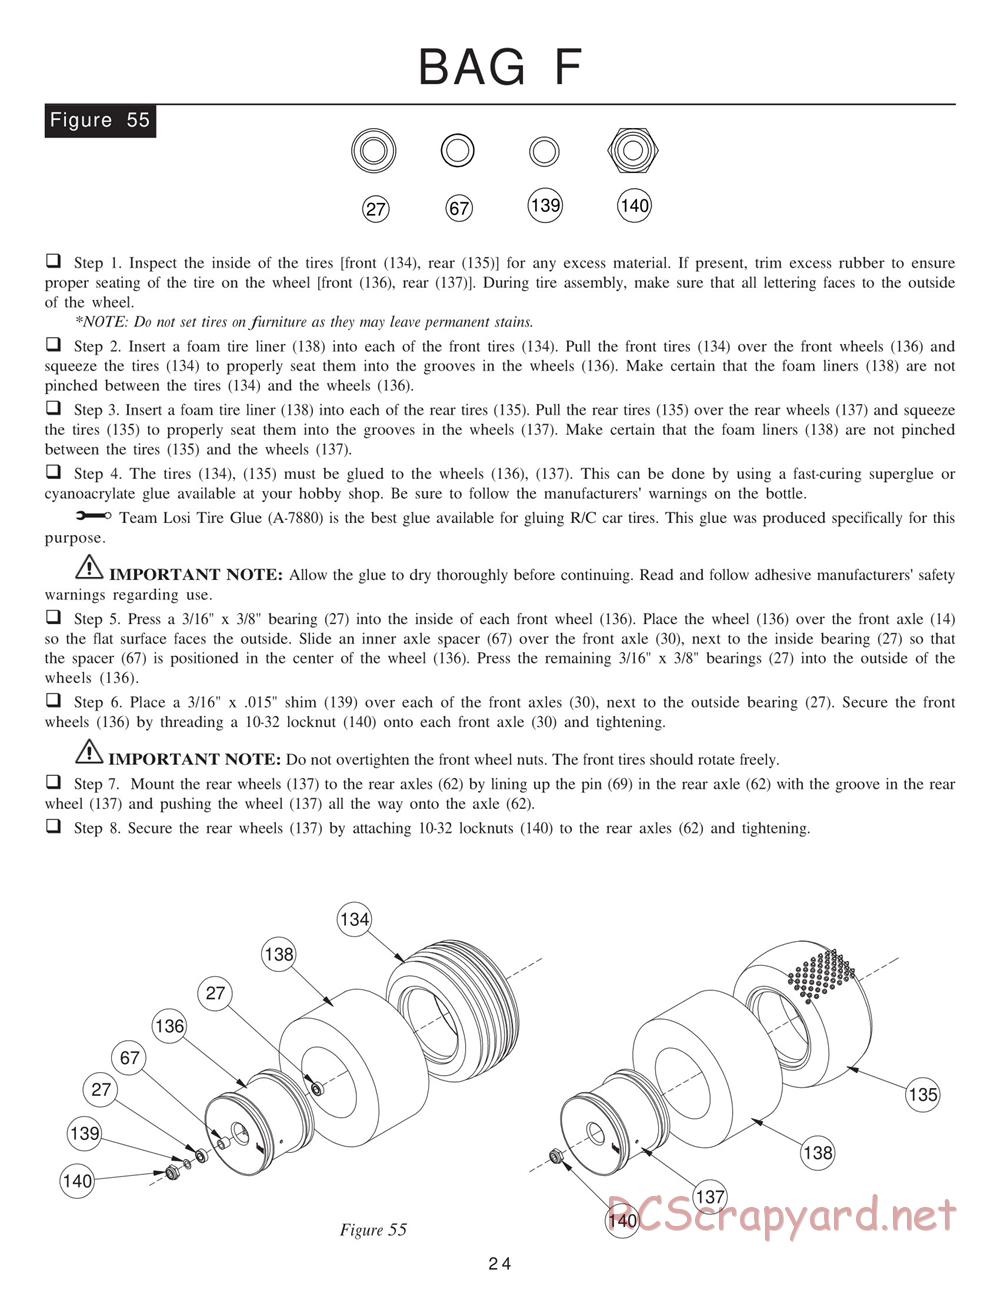 Team Losi - XXXT Sport RTRII - Manual - Page 28